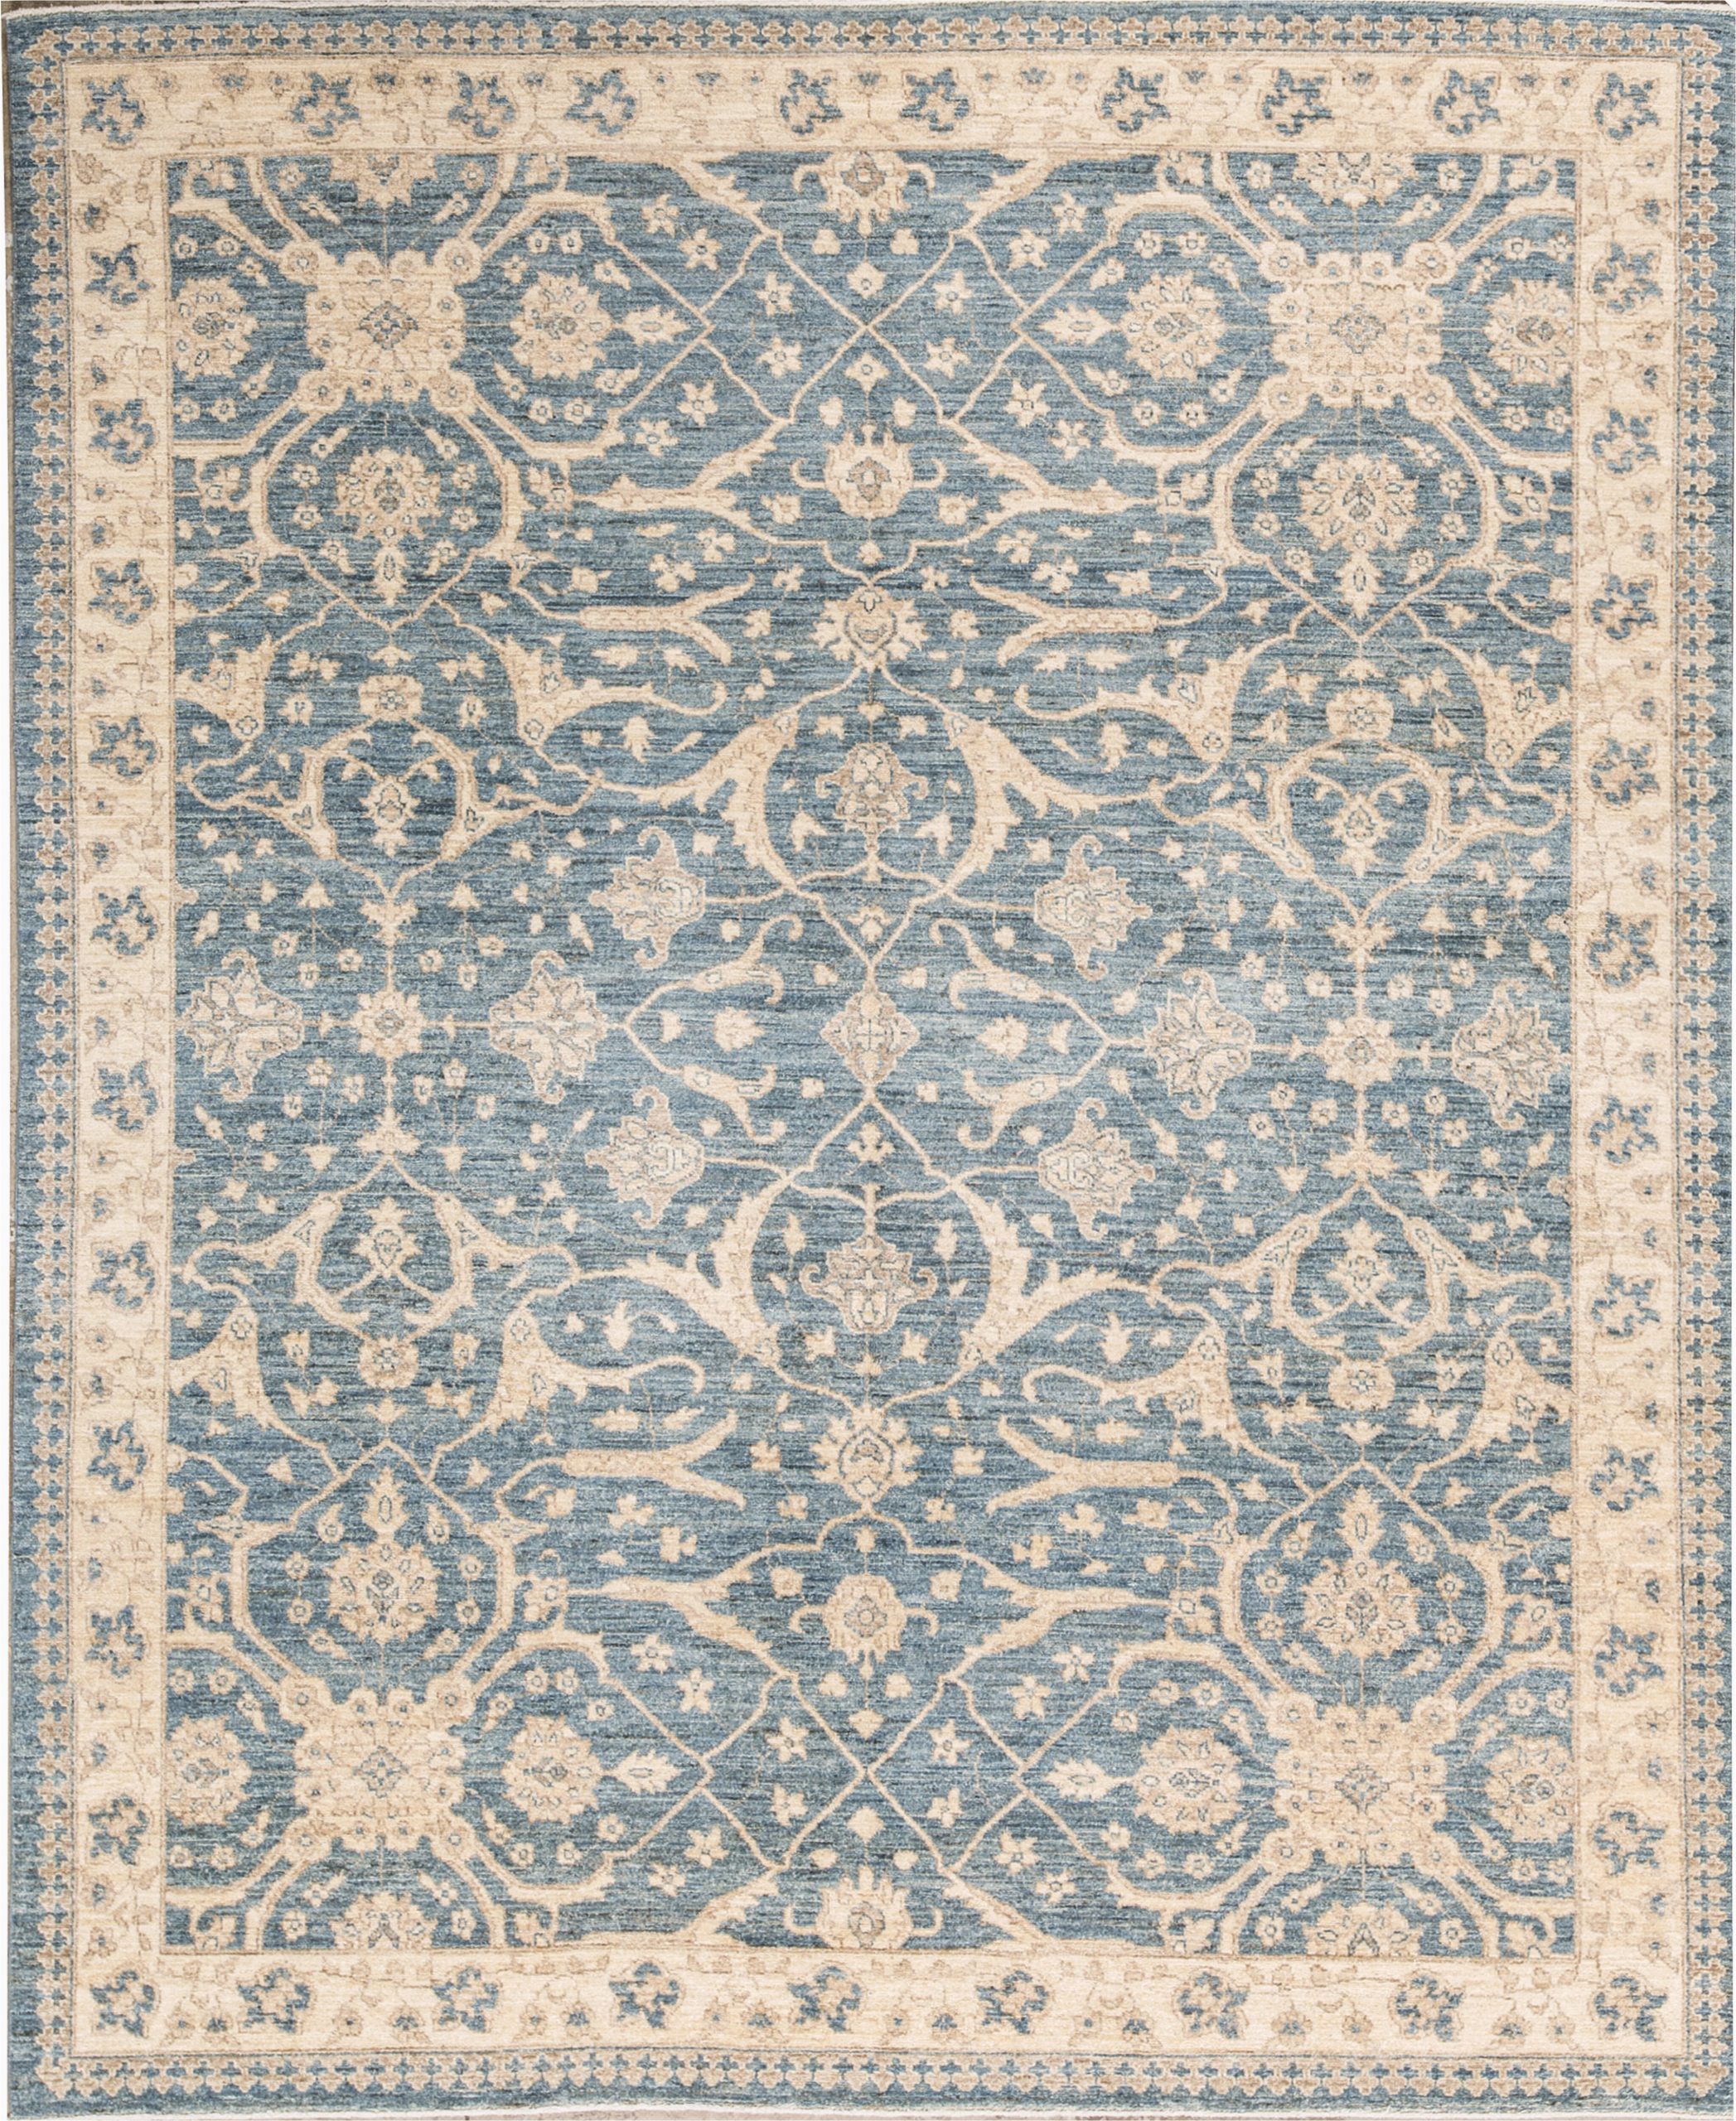 Cream and Light Blue Rug Sultanabad oriental Hand Knotted Wool Light Blue Cream area Rug